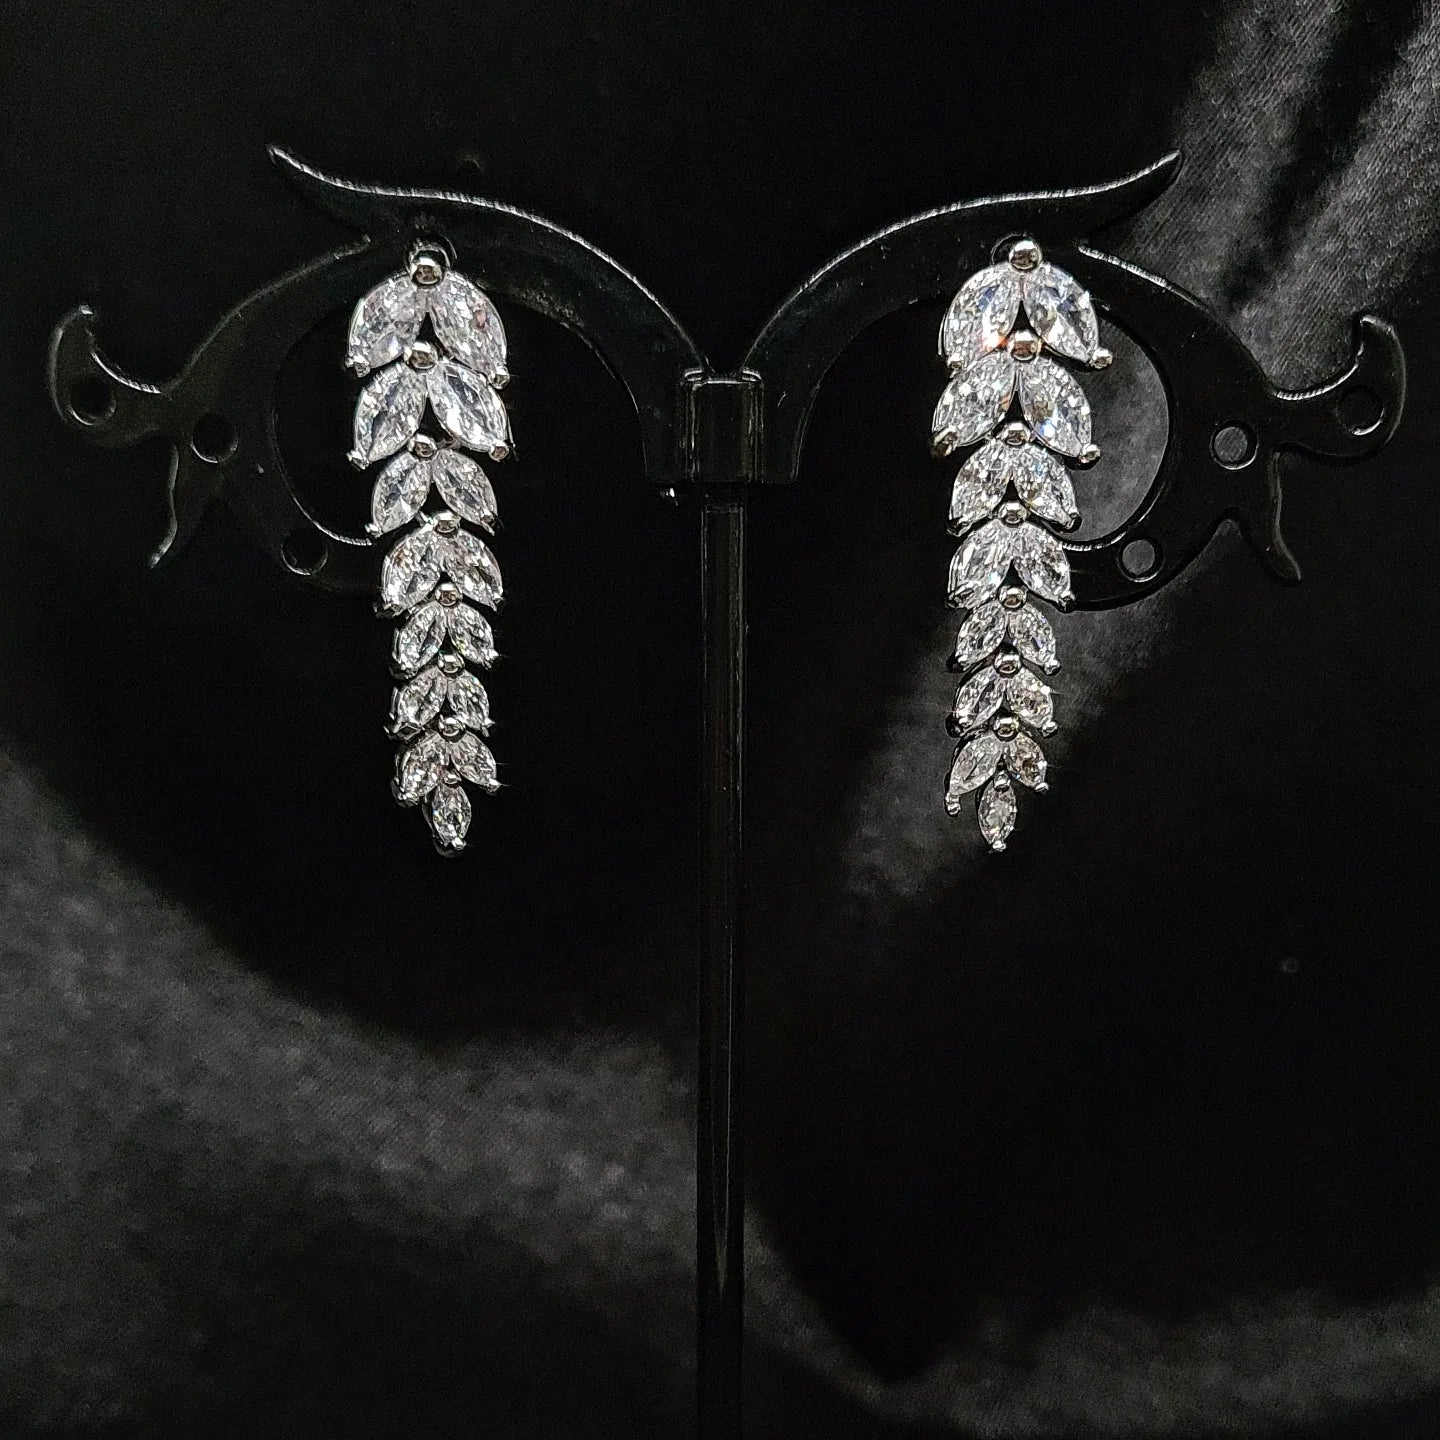 A pair of dangle earrings made of cubic zirconia. The earrings are teardrop-shaped and have a simple, elegant design. The cubic zirconia stones are clear and sparkling. The earrings are sitting on a black cloth.